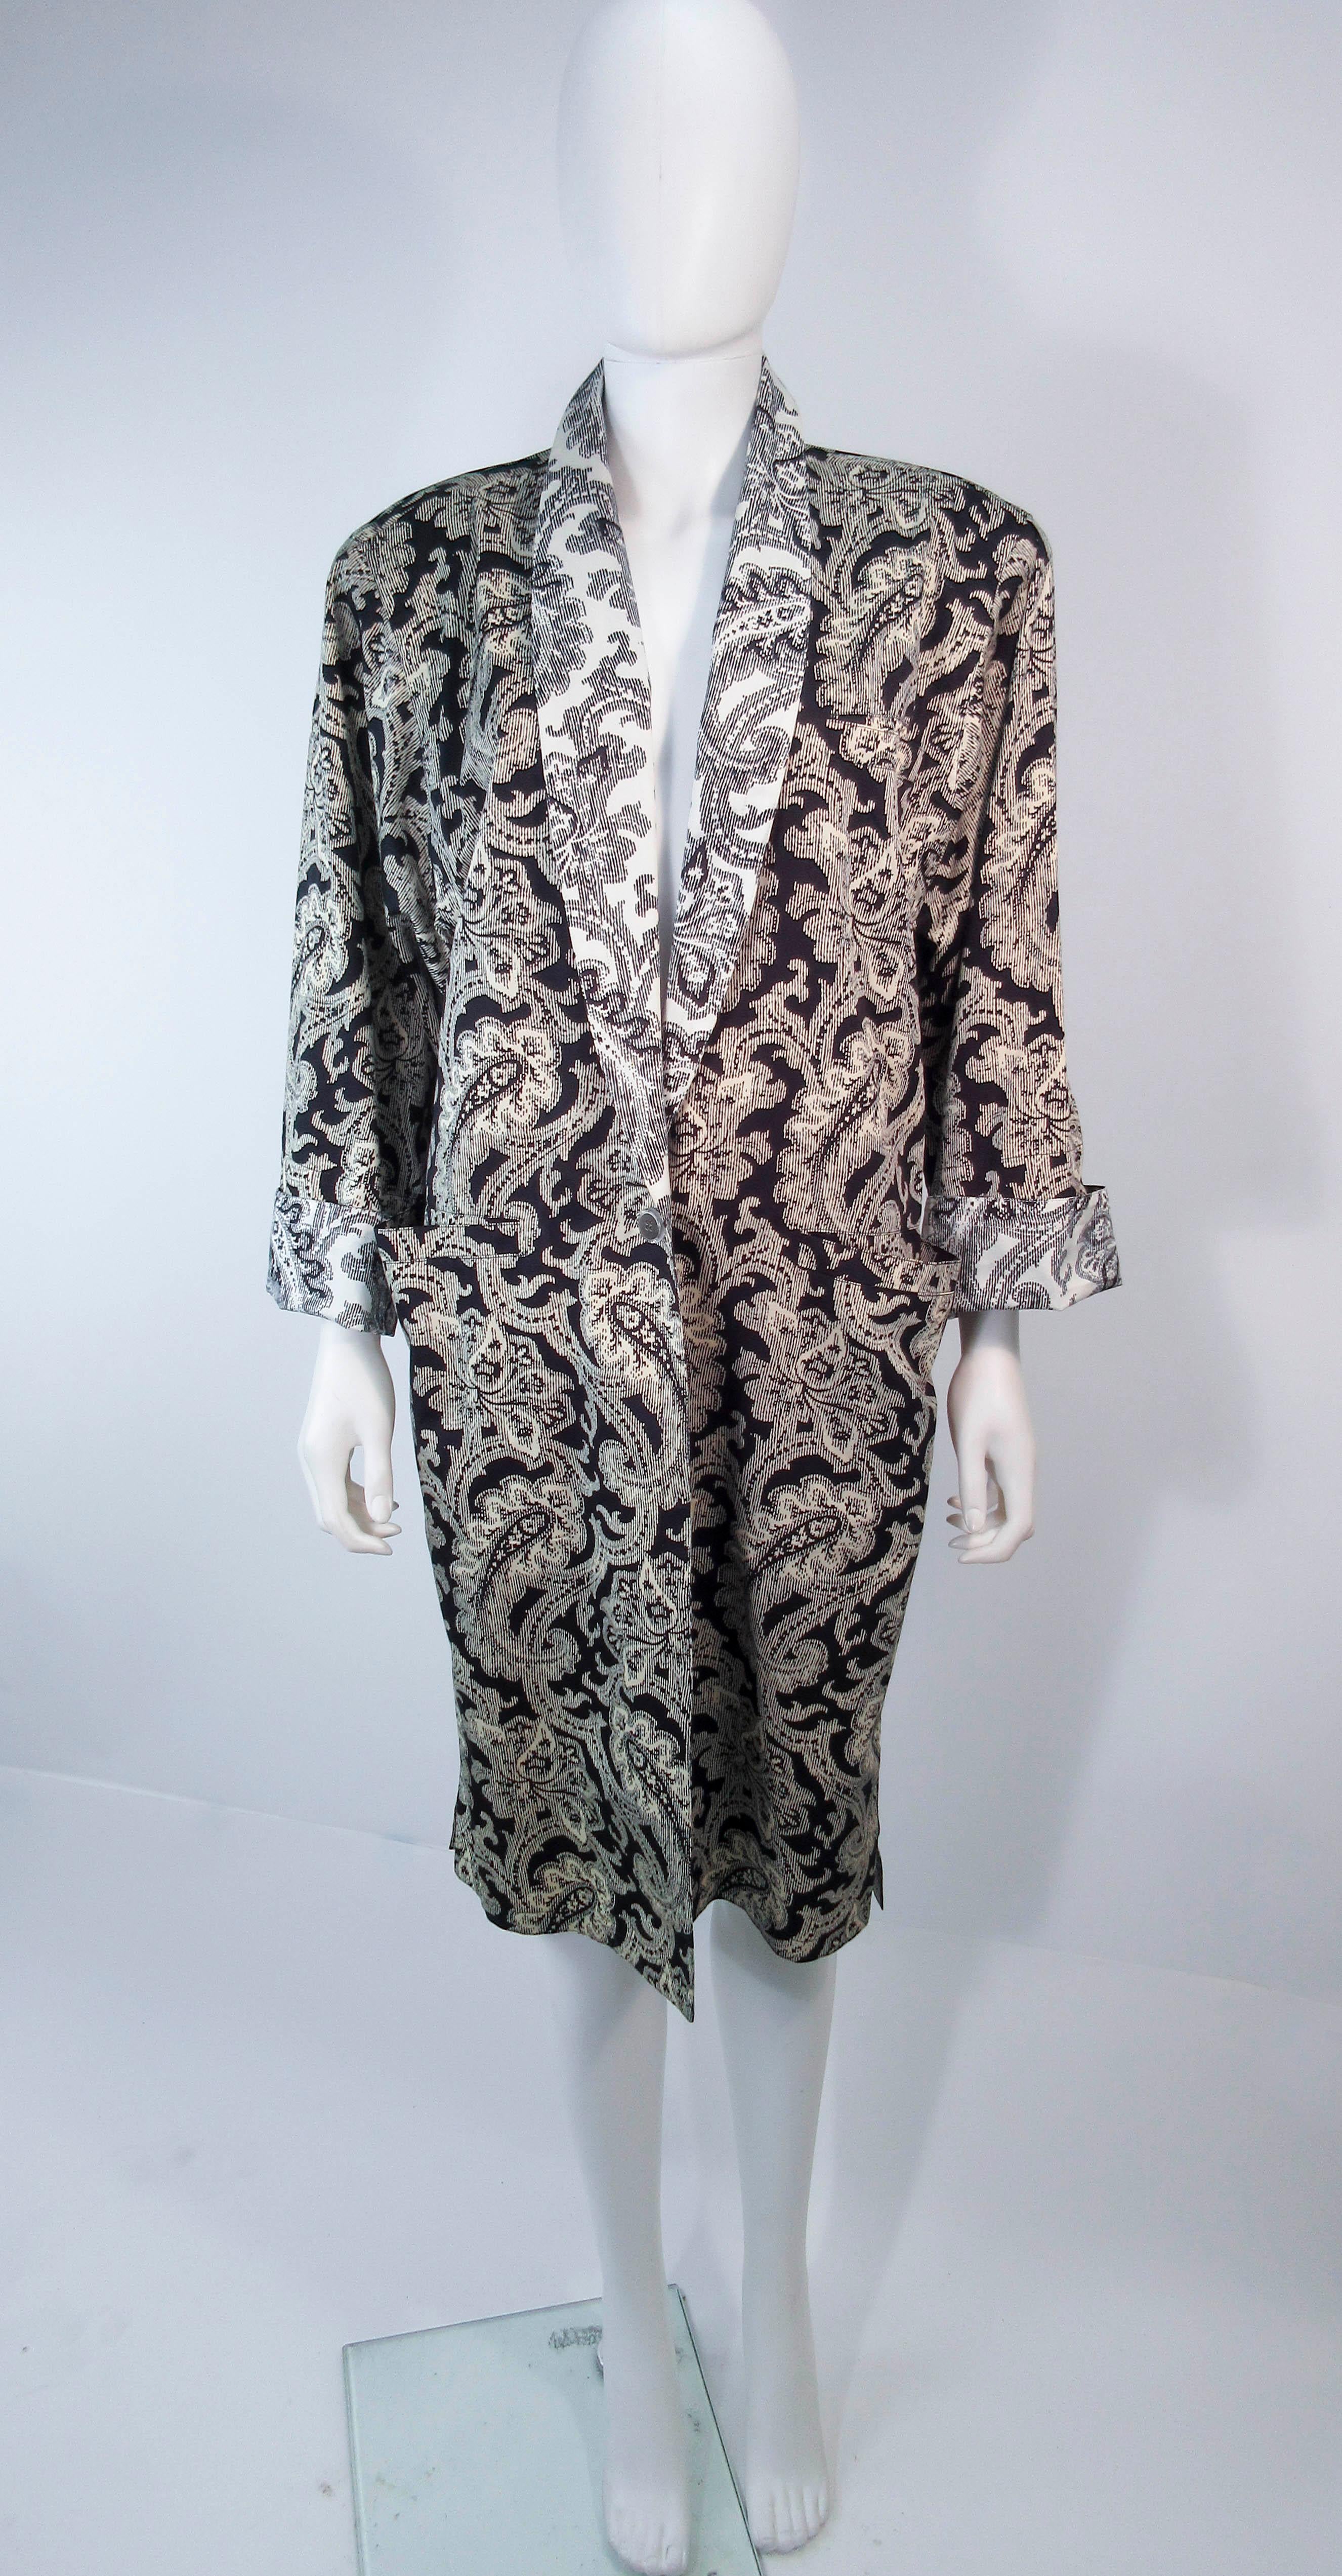 This vintage Versace coat is composed of a light weight black & white Venetian print textile. Features a center front button closure & pockets. In excellent vintage pre-owned condition, some discoloration (see photos). 

**Please cross-reference